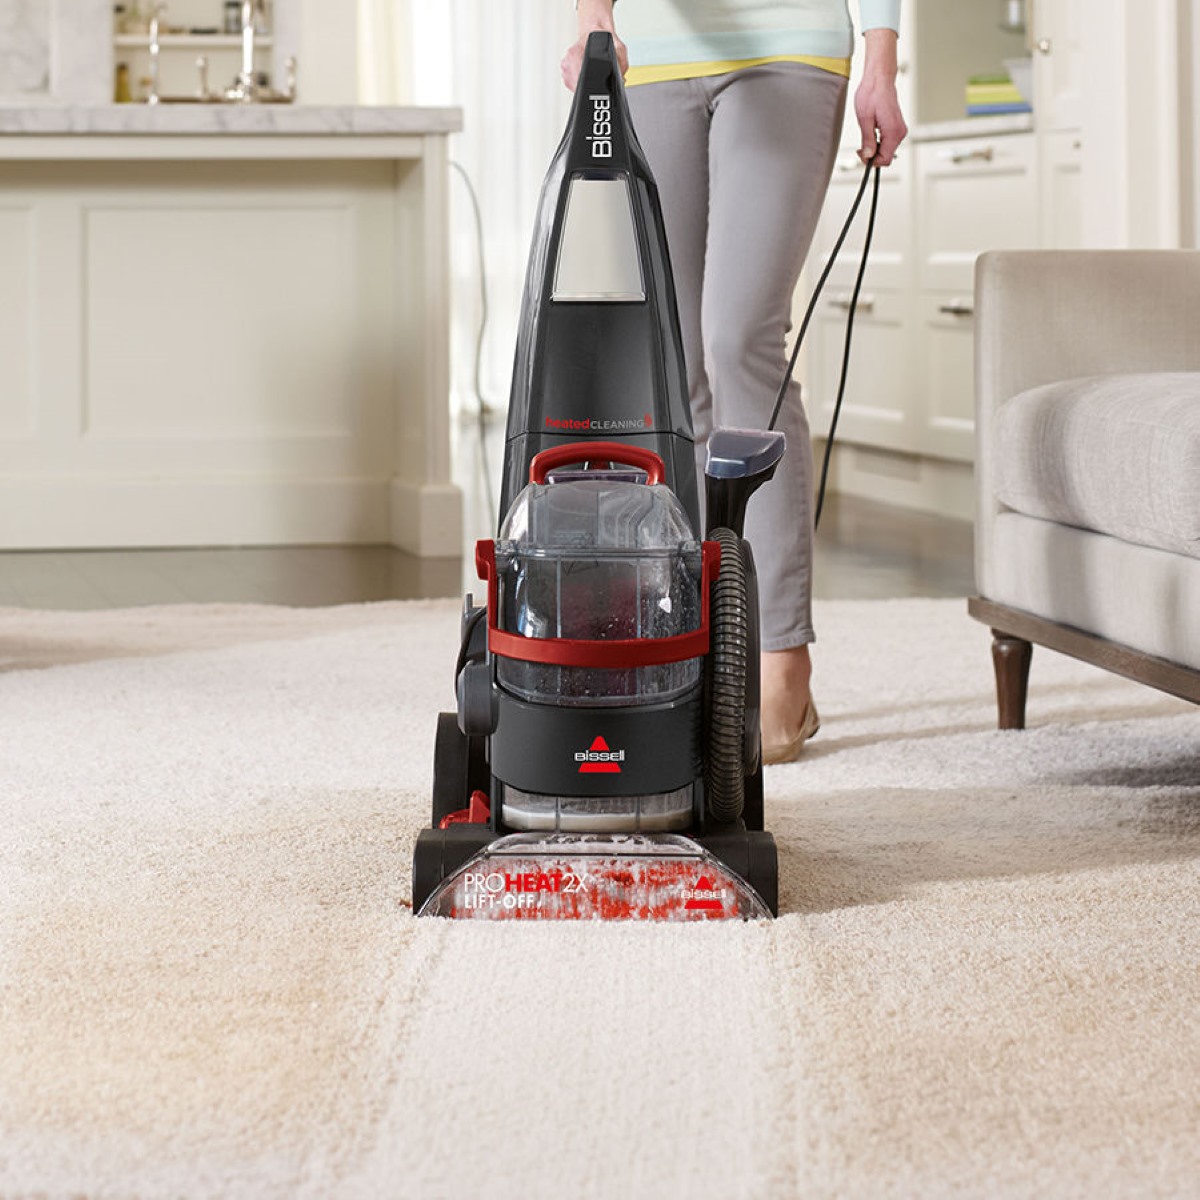 How To Unclog Bissell Carpet Cleaner